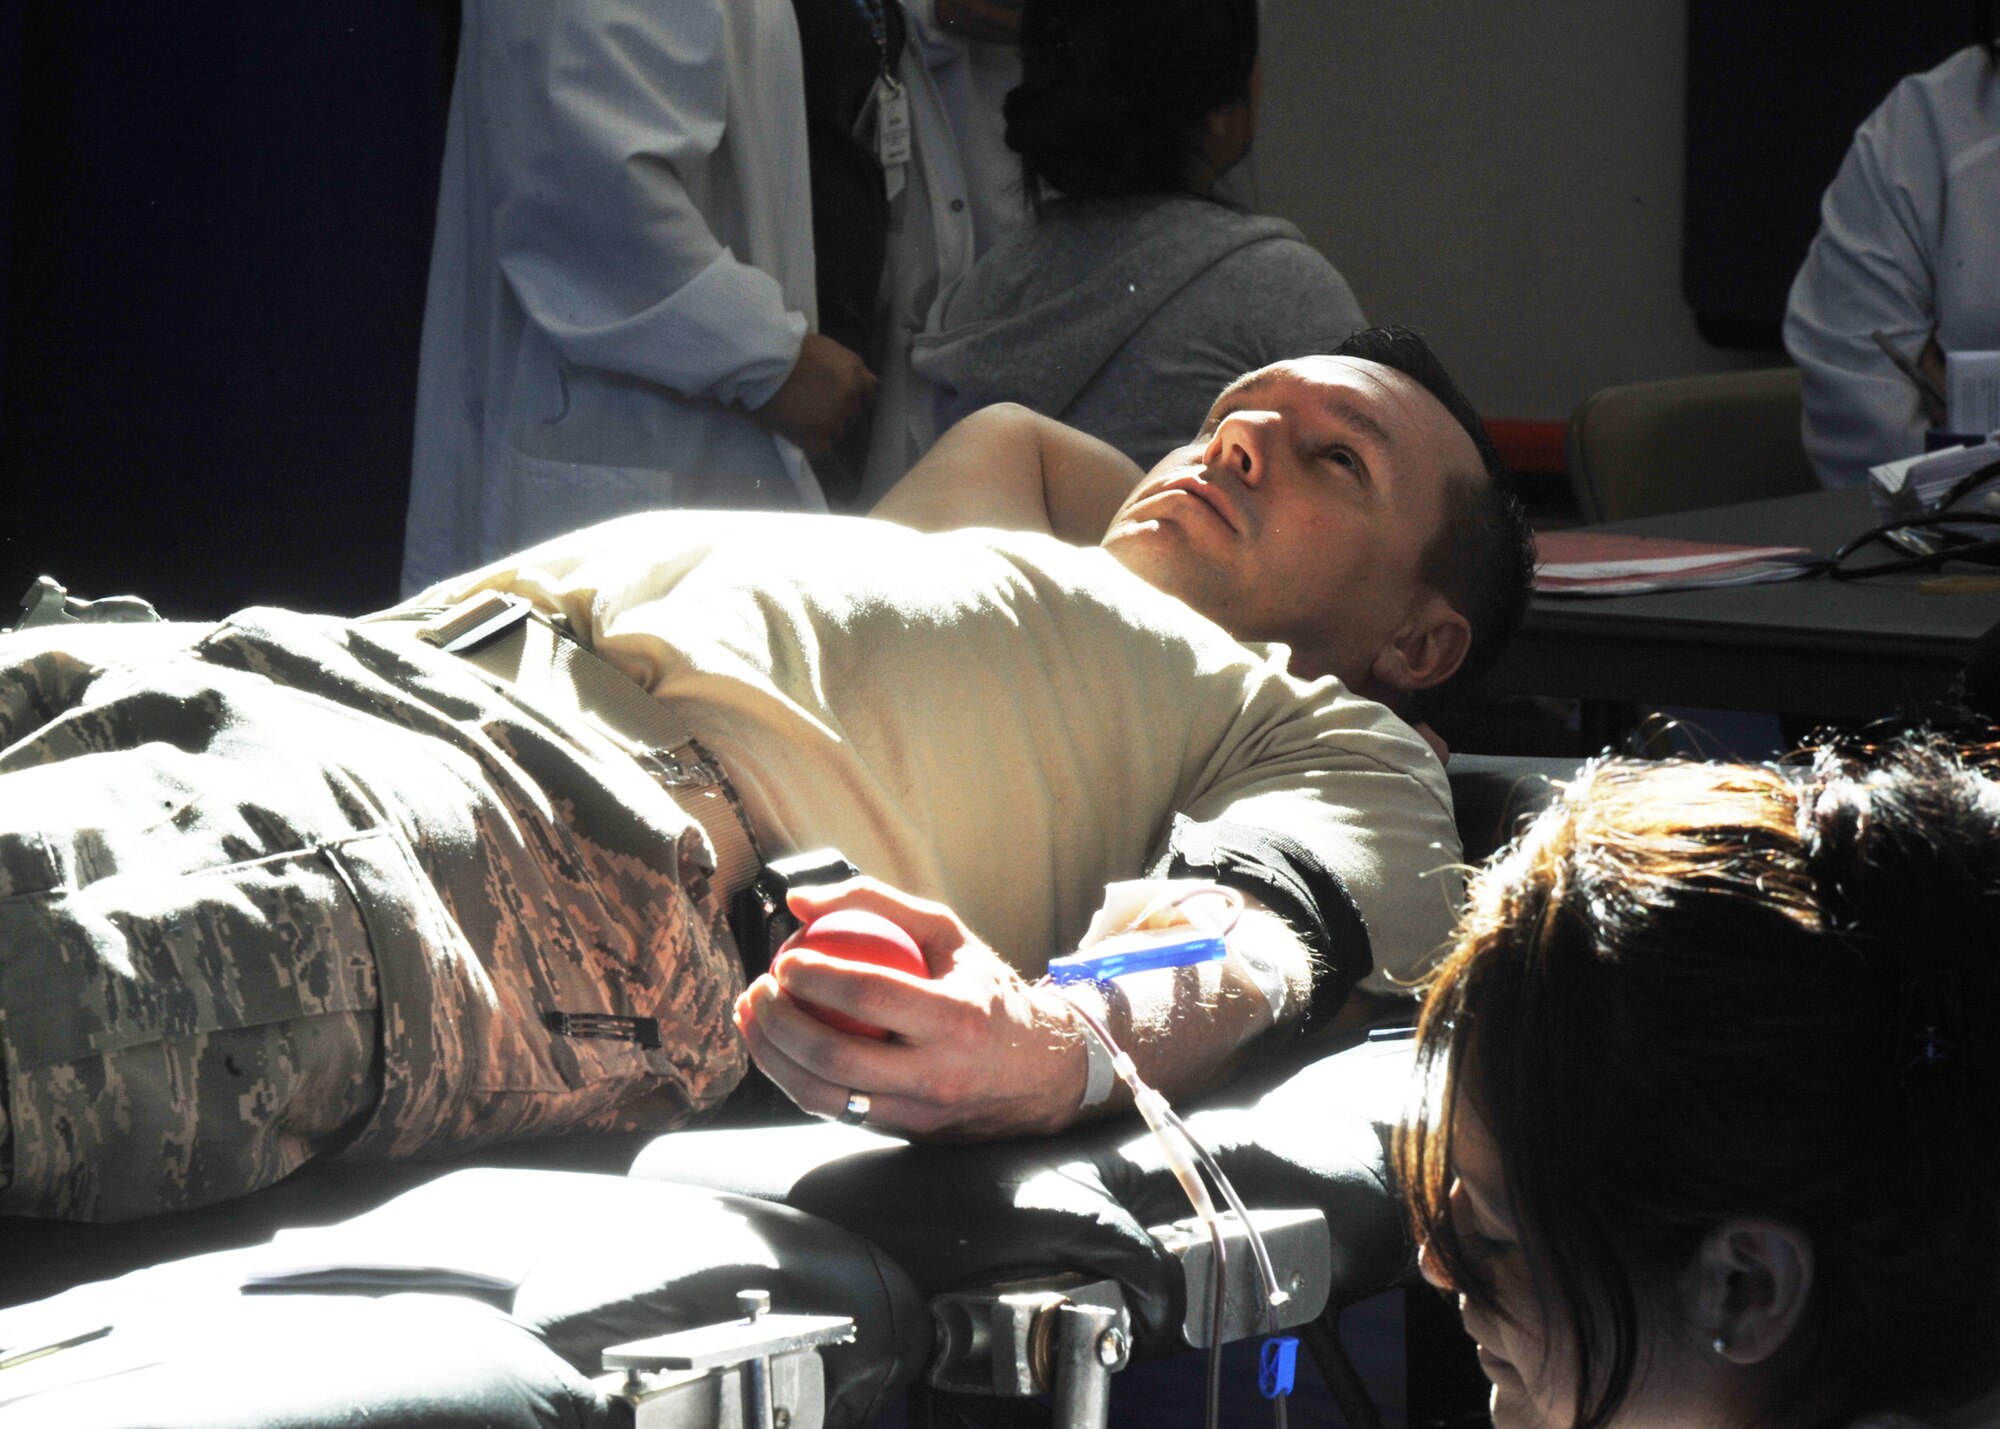 Senior Master Sergeant Justin Brodrick (left) donates blood while Red Cross technician Angie Castellanos (right) monitors his vitals at the Seventh Annual Battle of the Badges blood drive, Jan. 31.  The 61st Security Forces Squadron and other local police departments held blood drives and competed to see which department collected the most blood donations.  (Photo by Sarah Corrice)